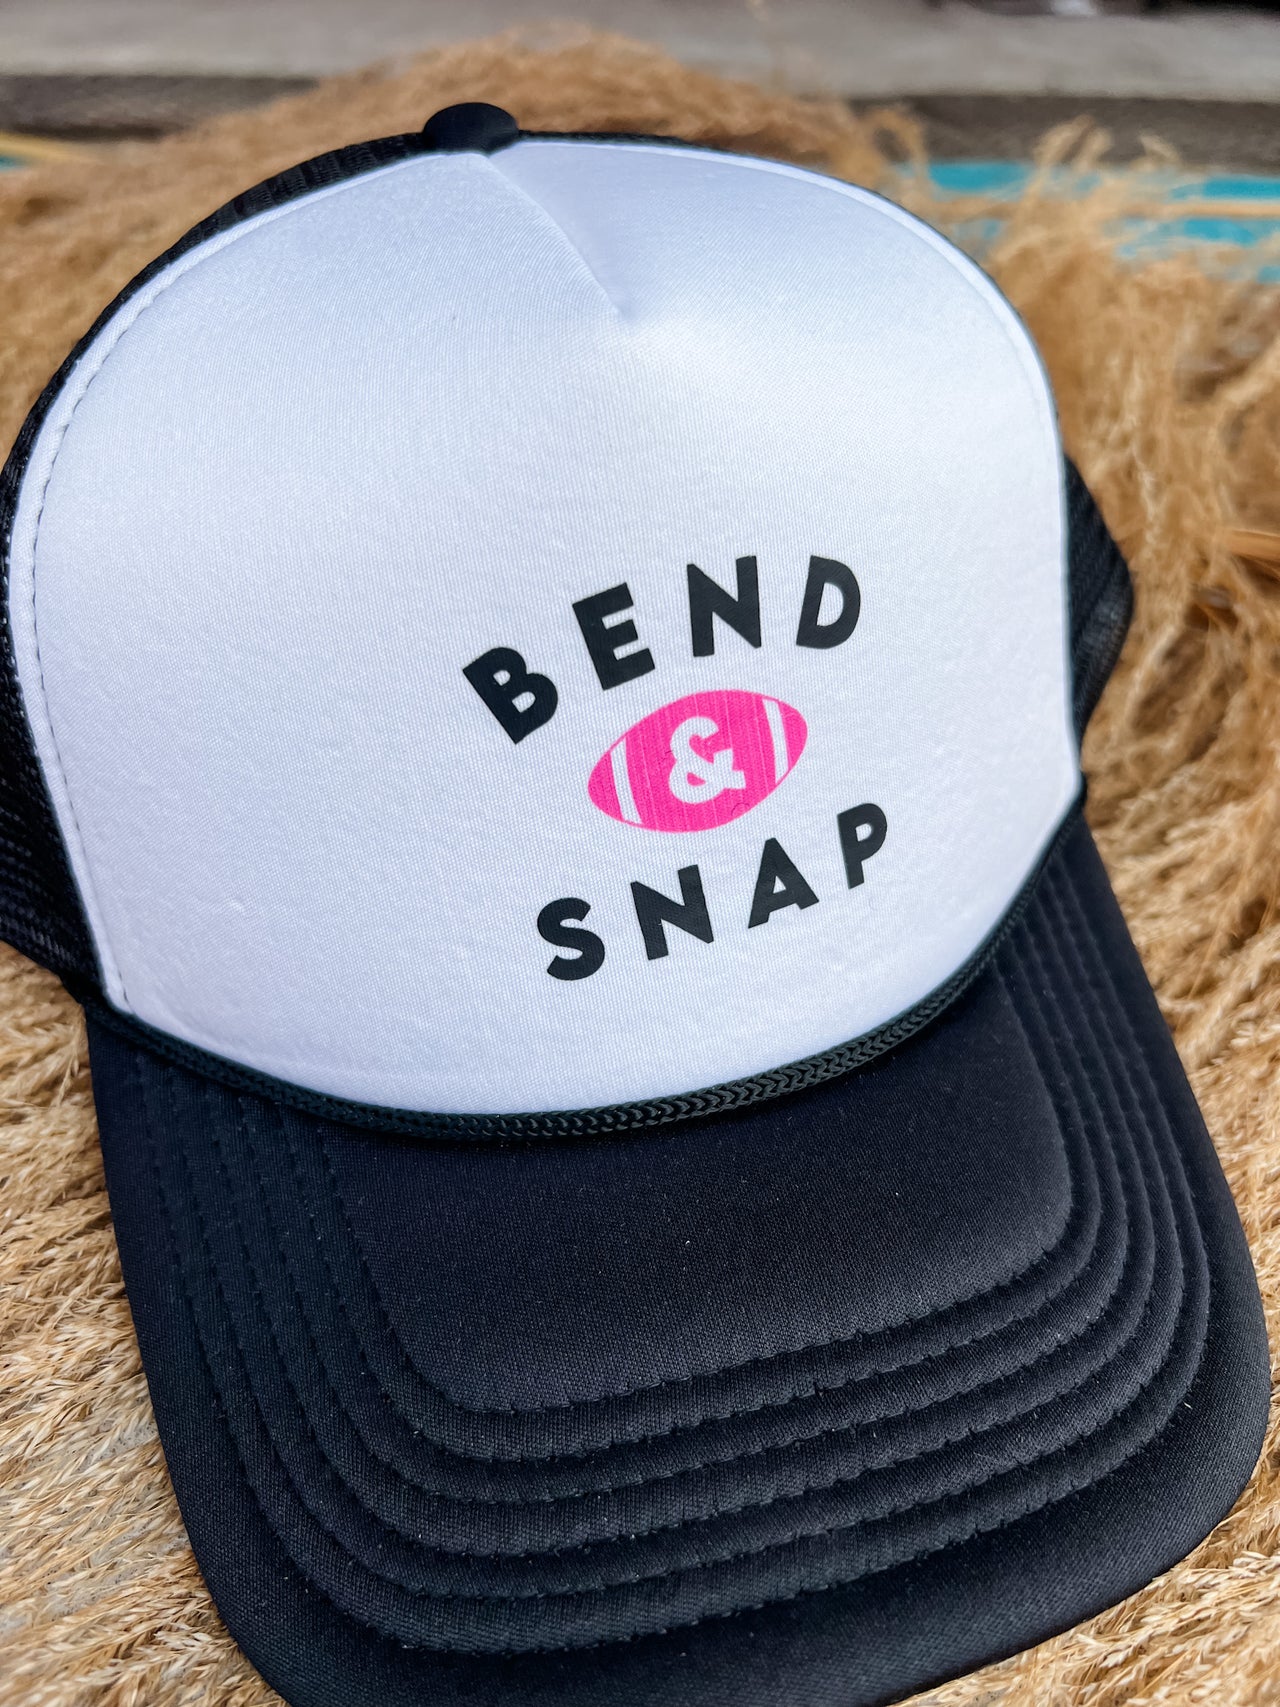 Bend and Snap Foam Hat